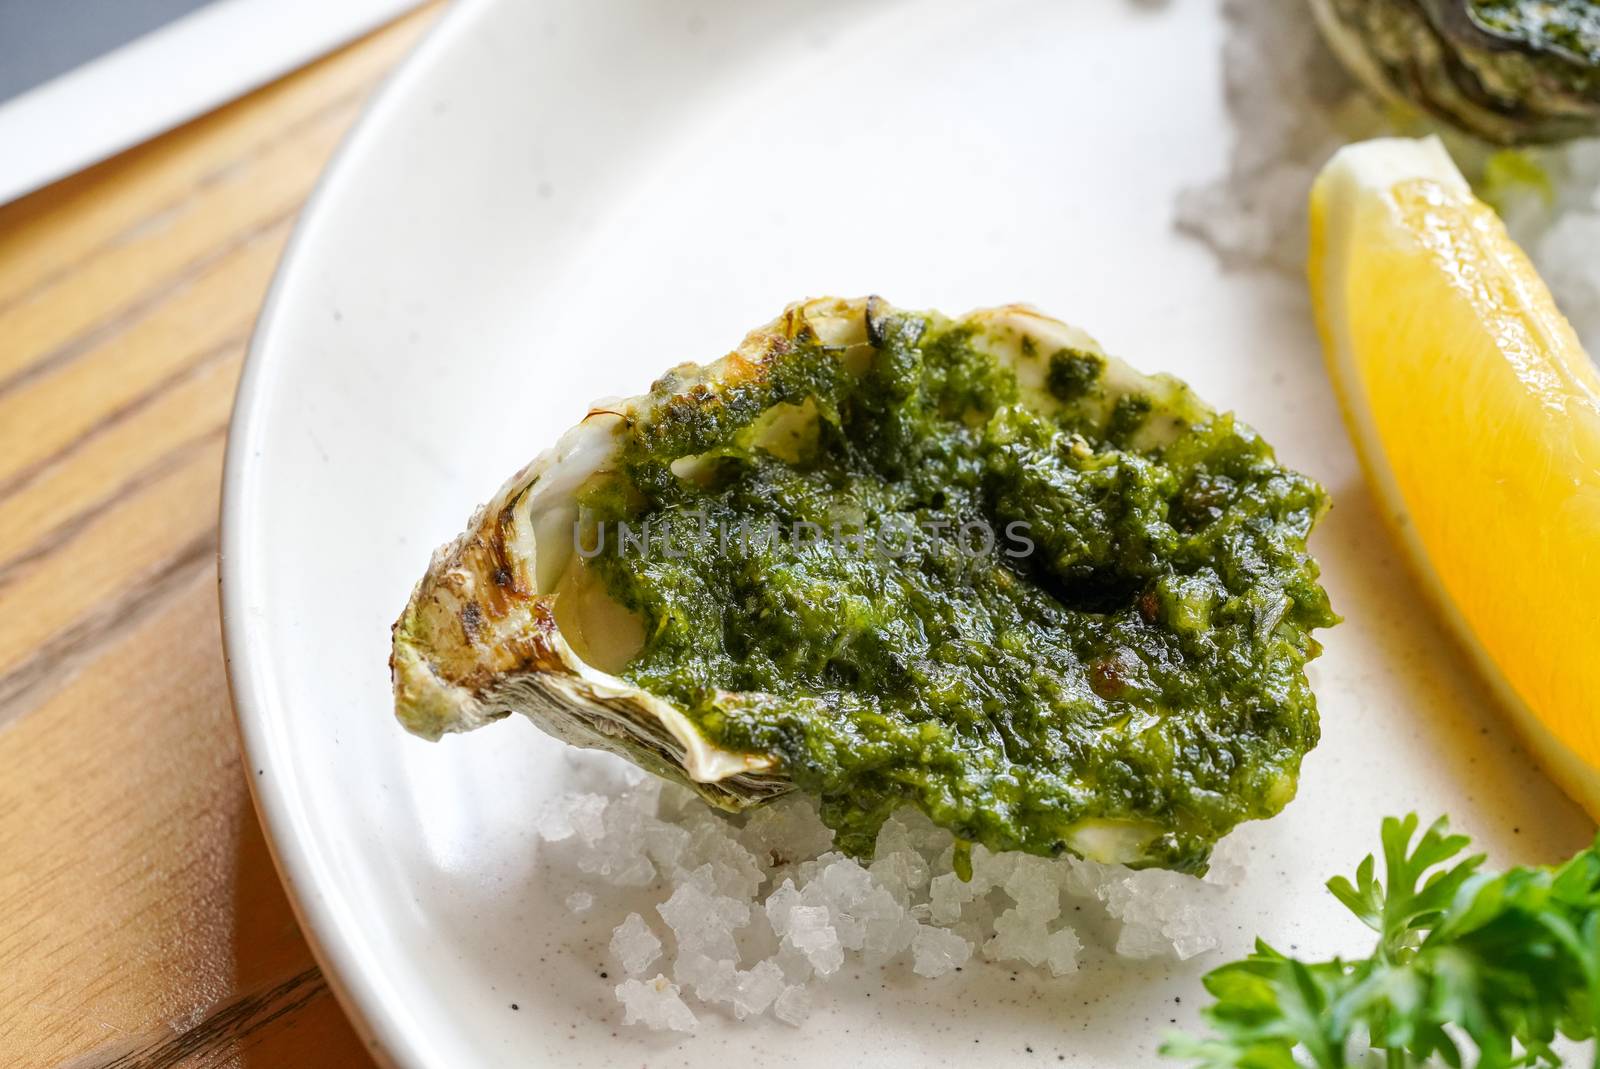 Half-shell oysters  topped with a rich sauce of butter, parsley and green herbs served on white plate by chadchai_k